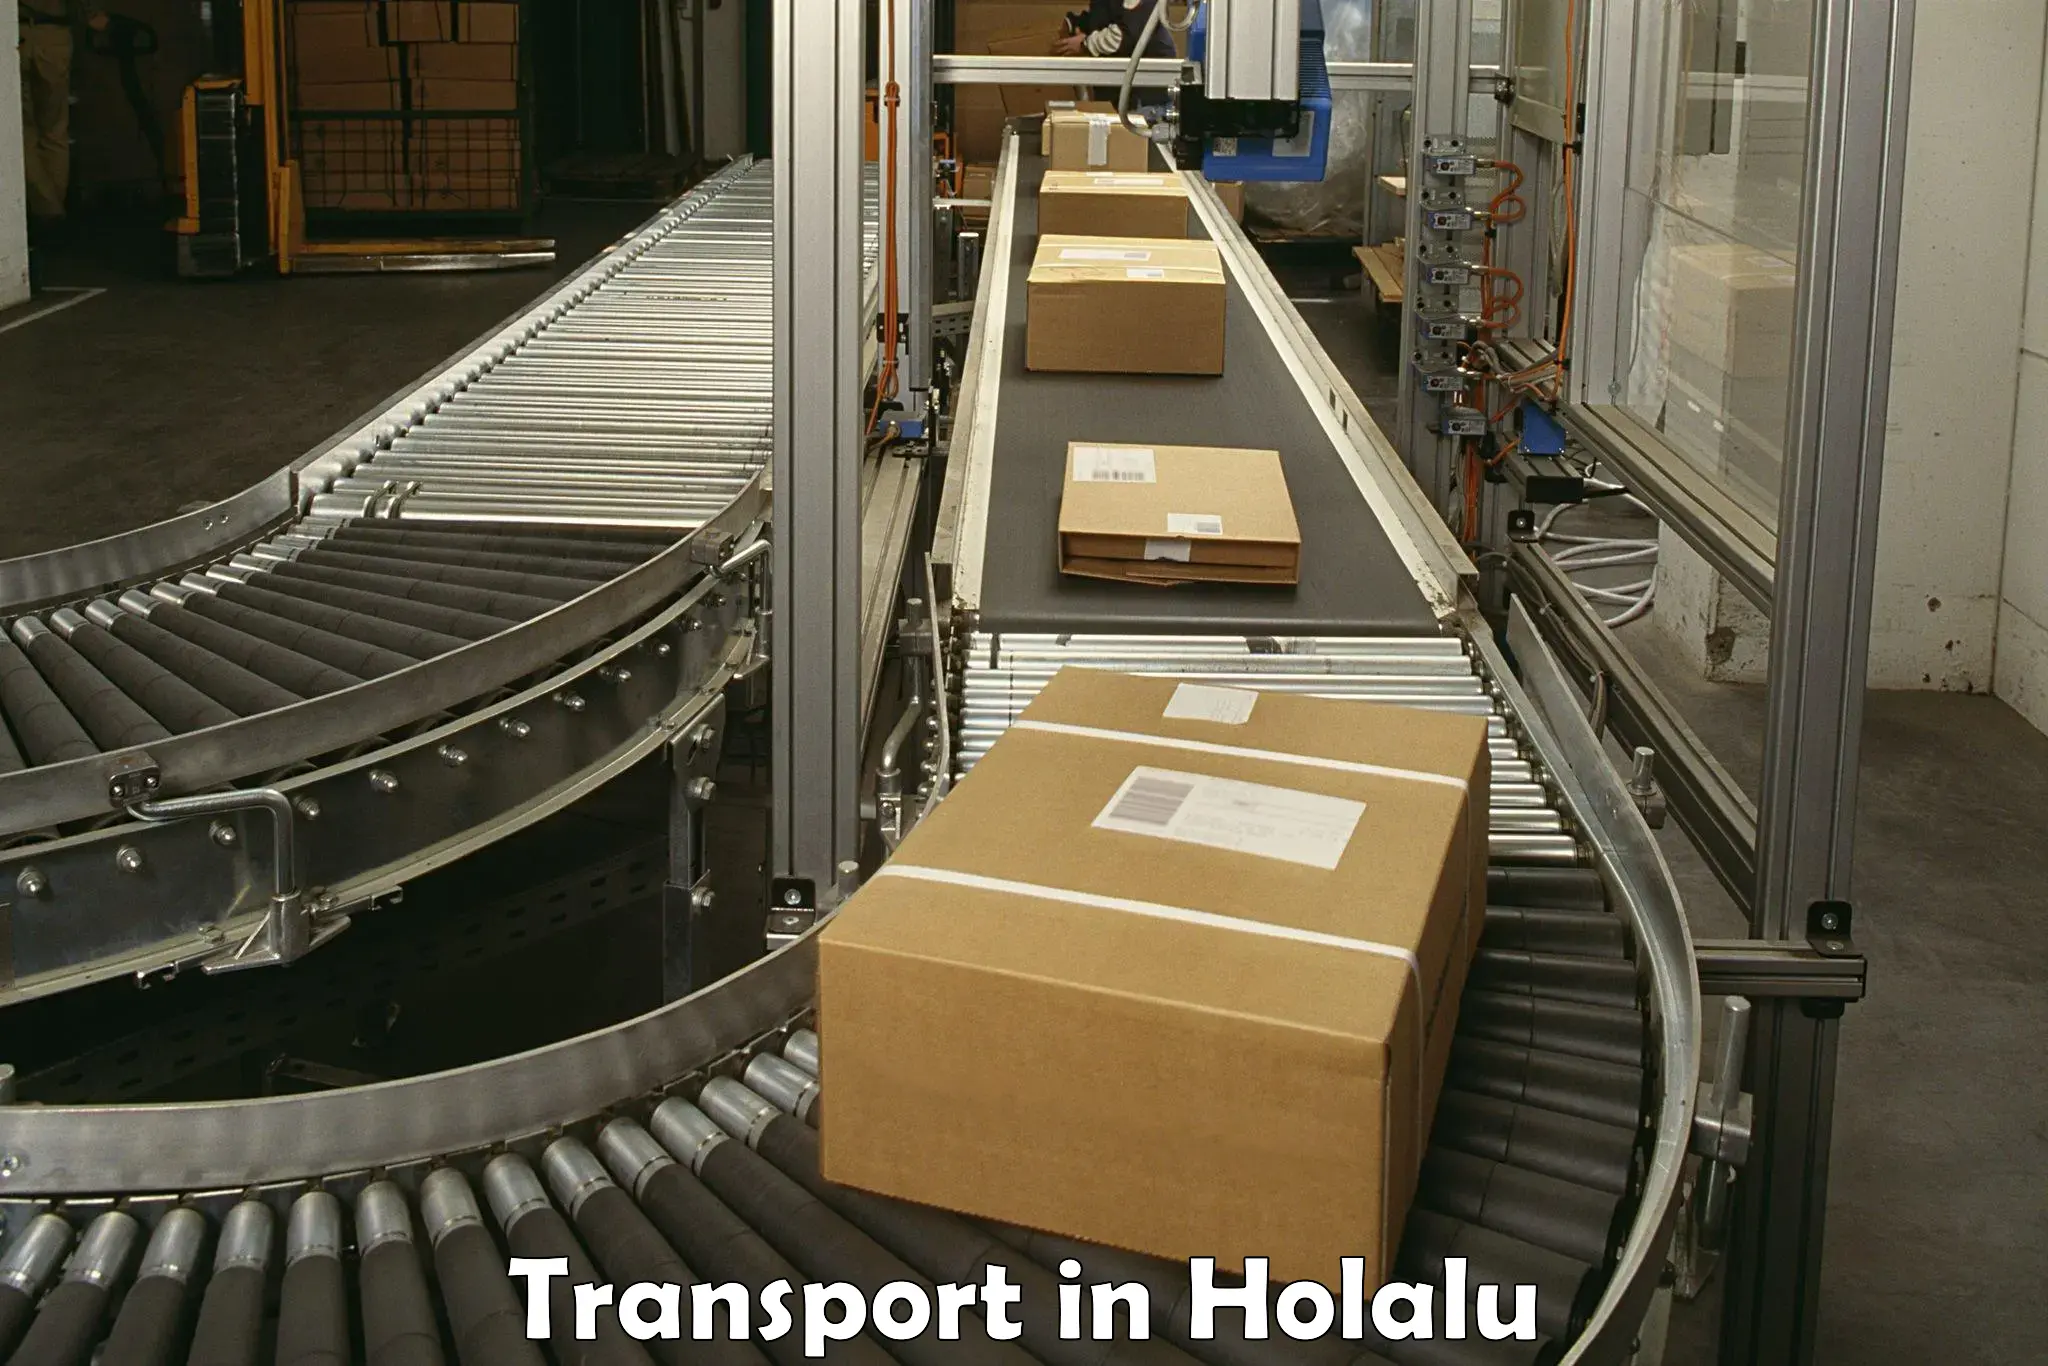 Daily parcel service transport in Holalu